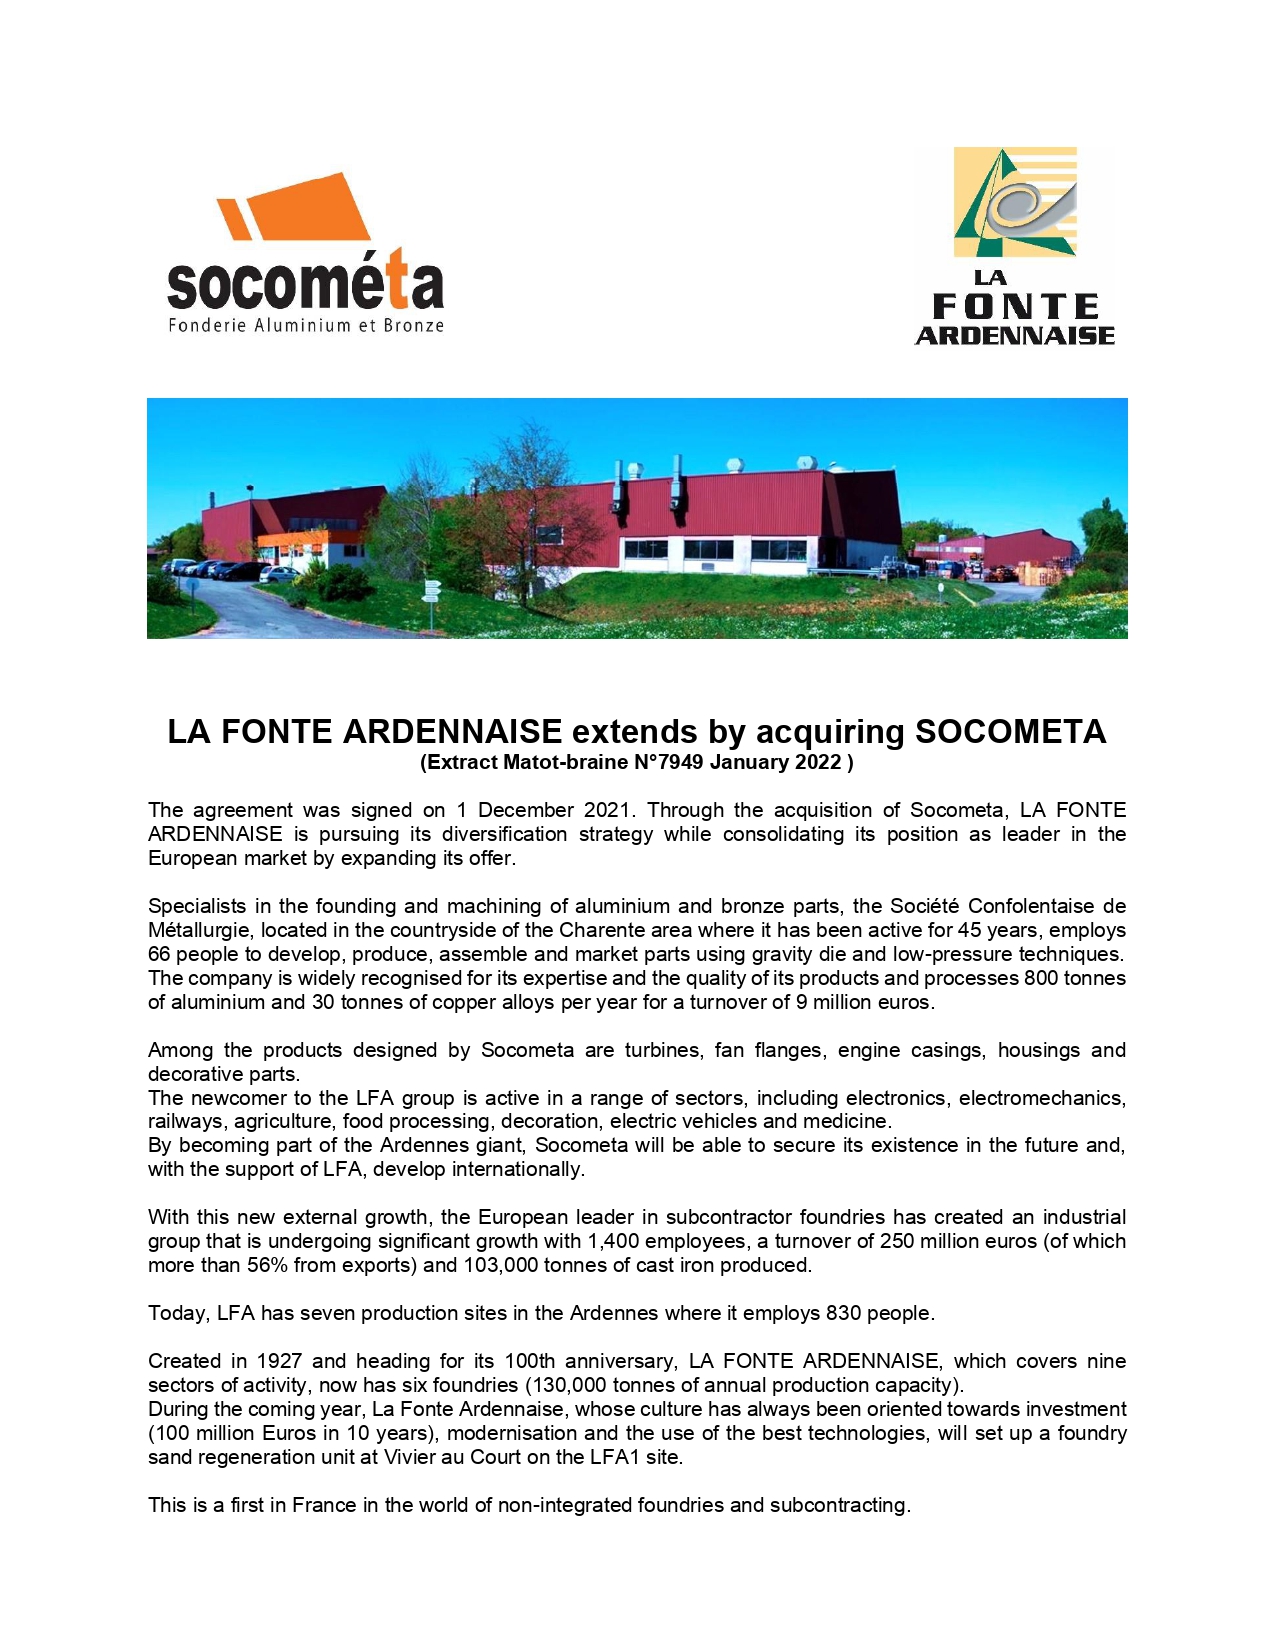 LA FONTE ARDENNAISE becomes more diverse by taking over the company SOCOMETA